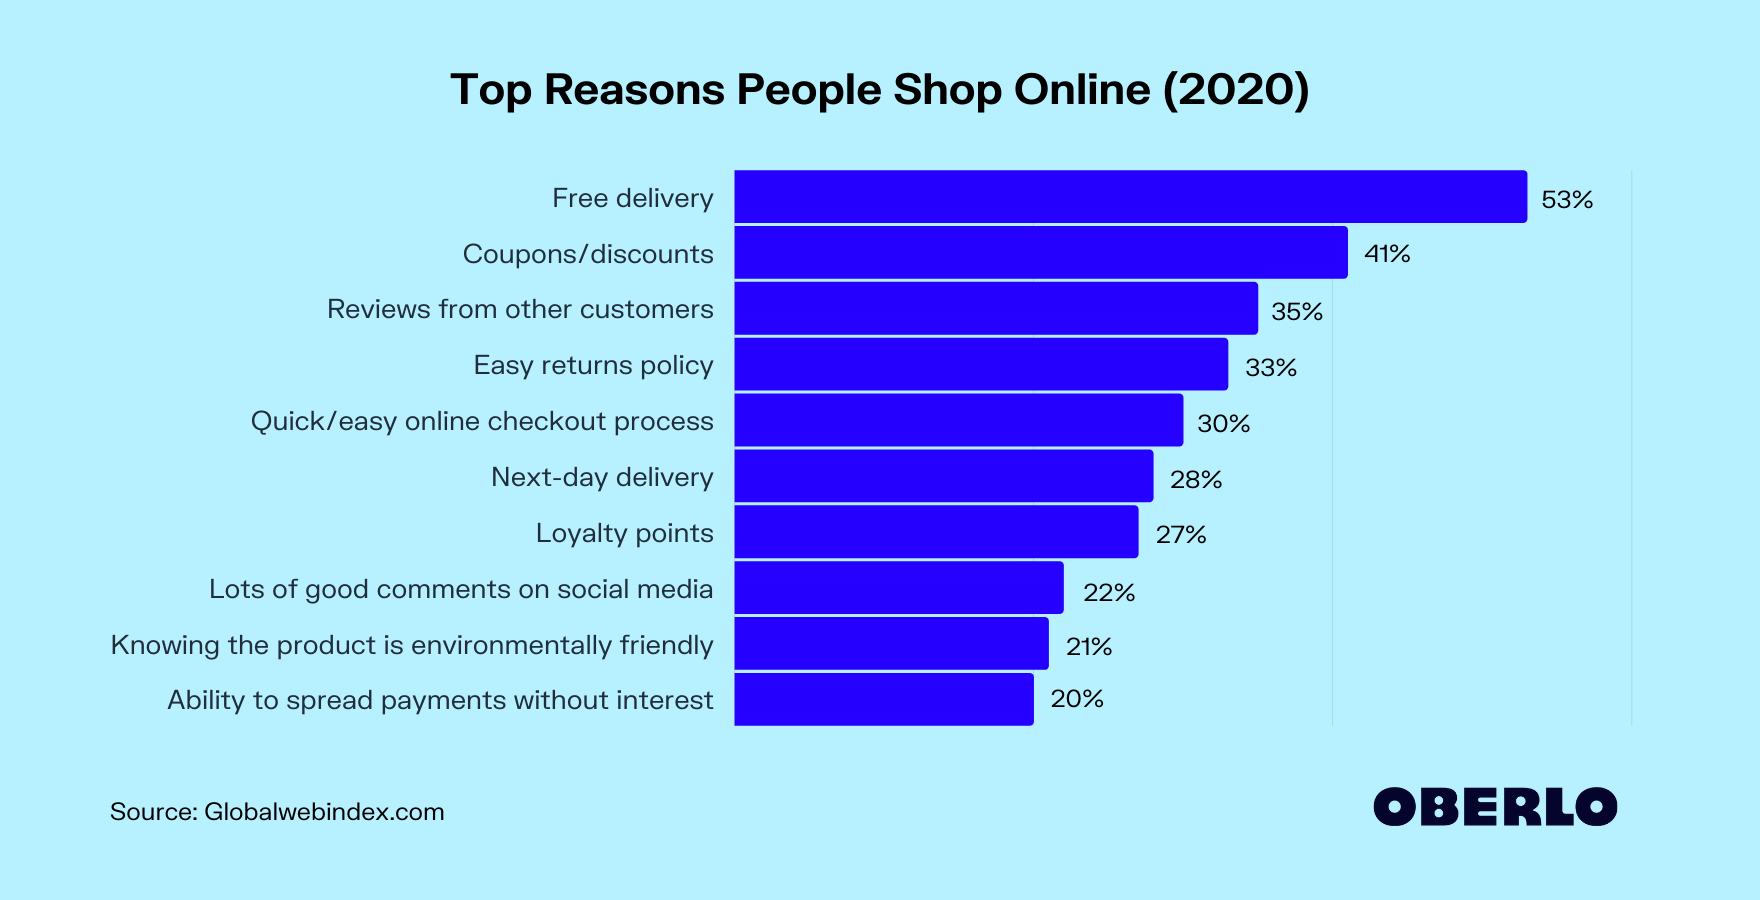 There are many reasons consumers prefer to shop online